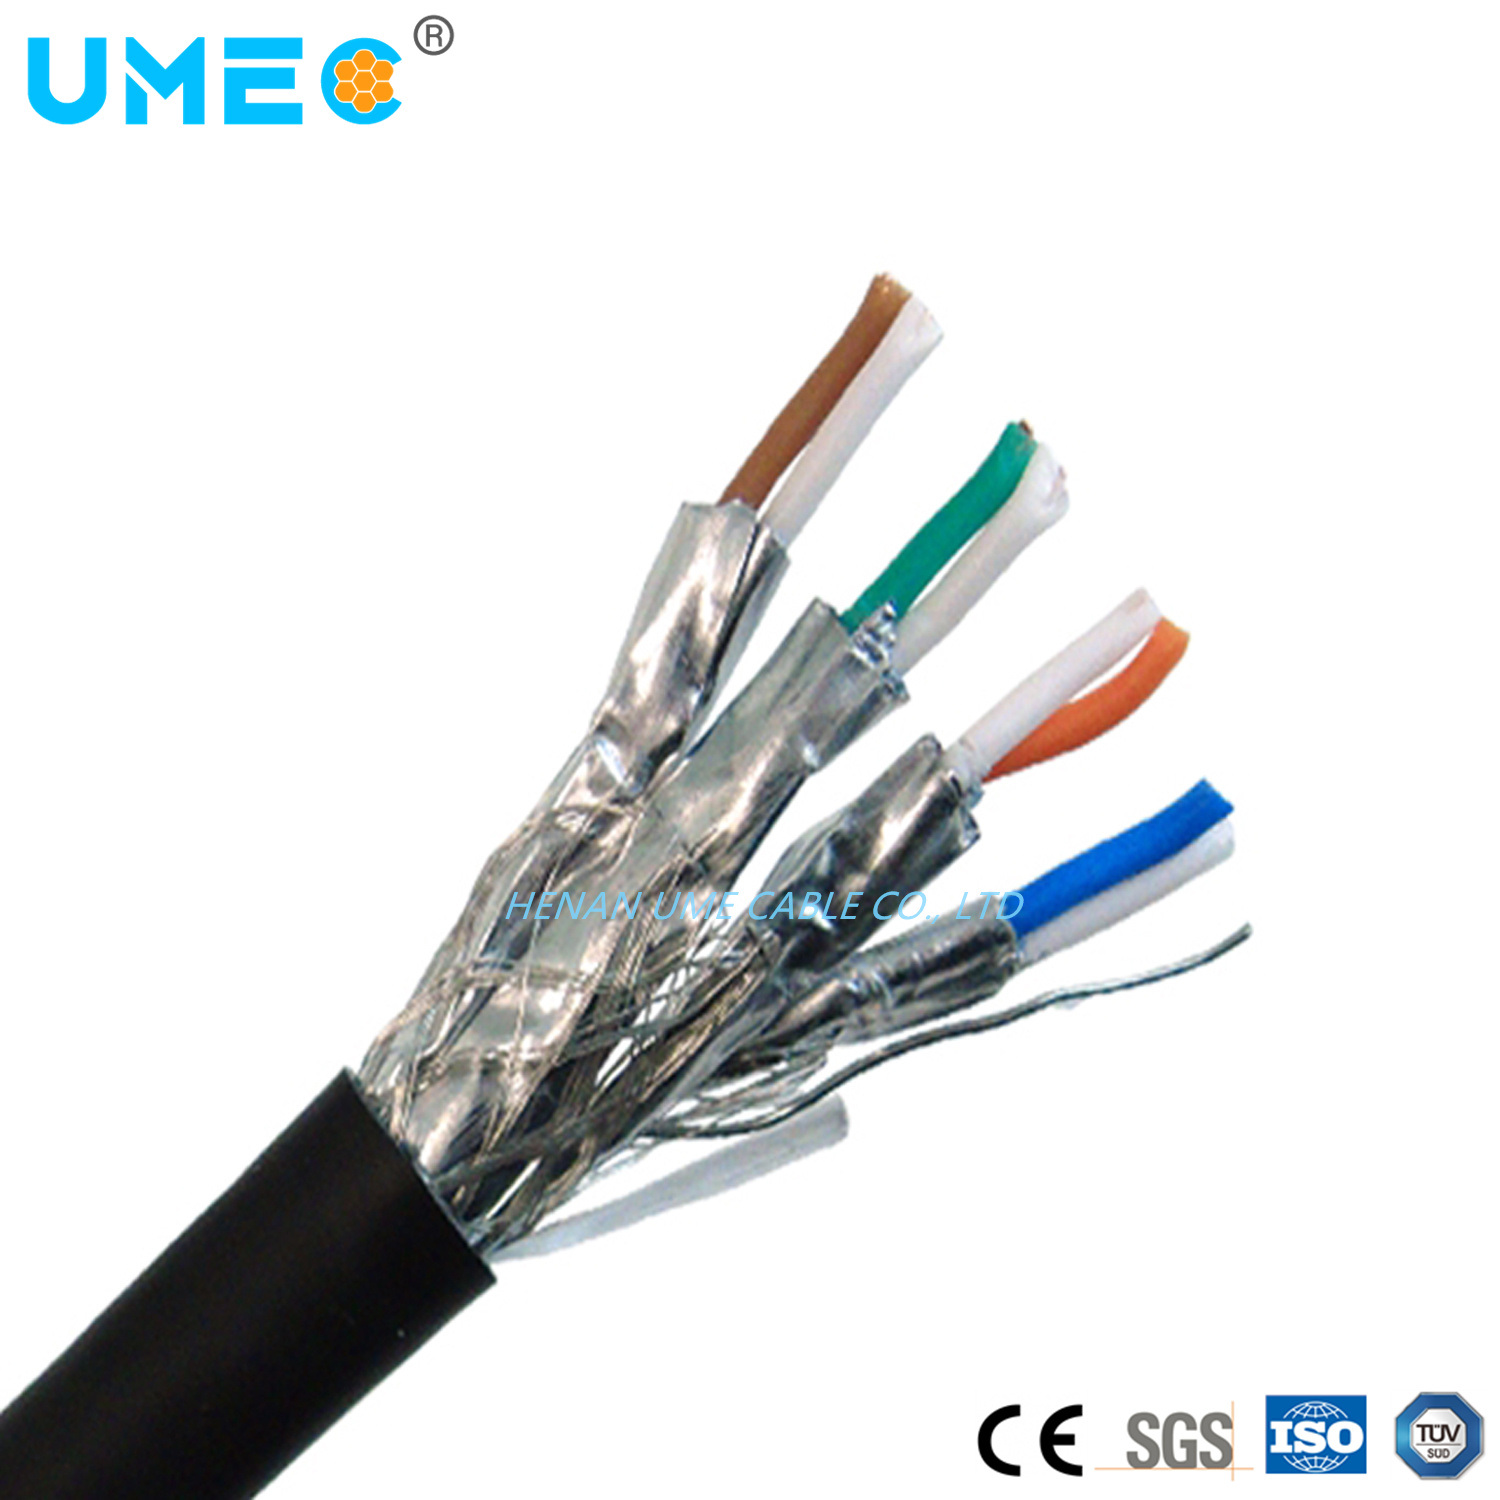 Multicore Low Voltage Shielded Cable Braided Individual Shielding Cable Computer Cable